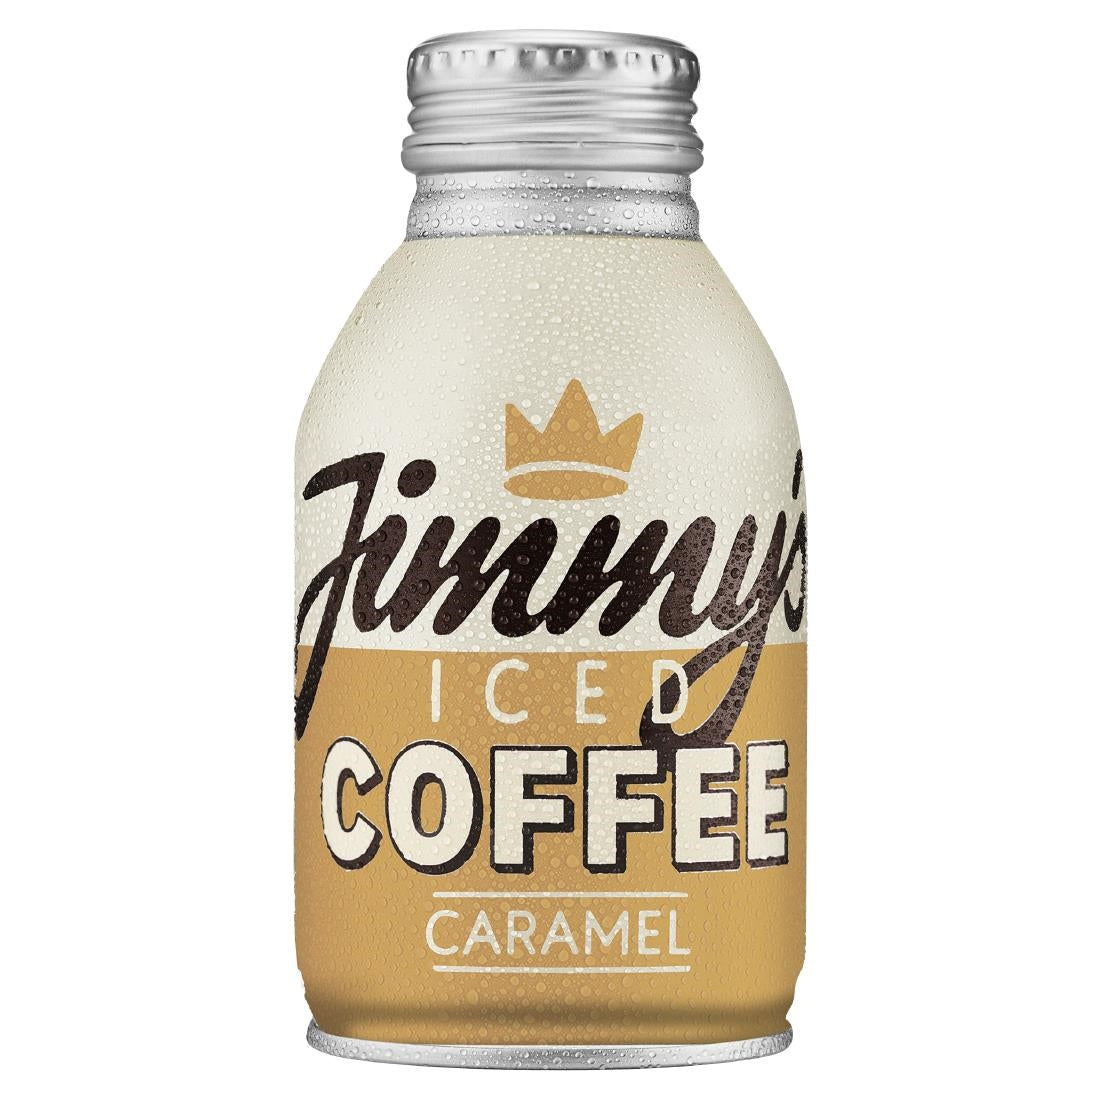 HS811 Jimmy's Caramel Iced Coffee BottleCan 275ml (Pack of 12)